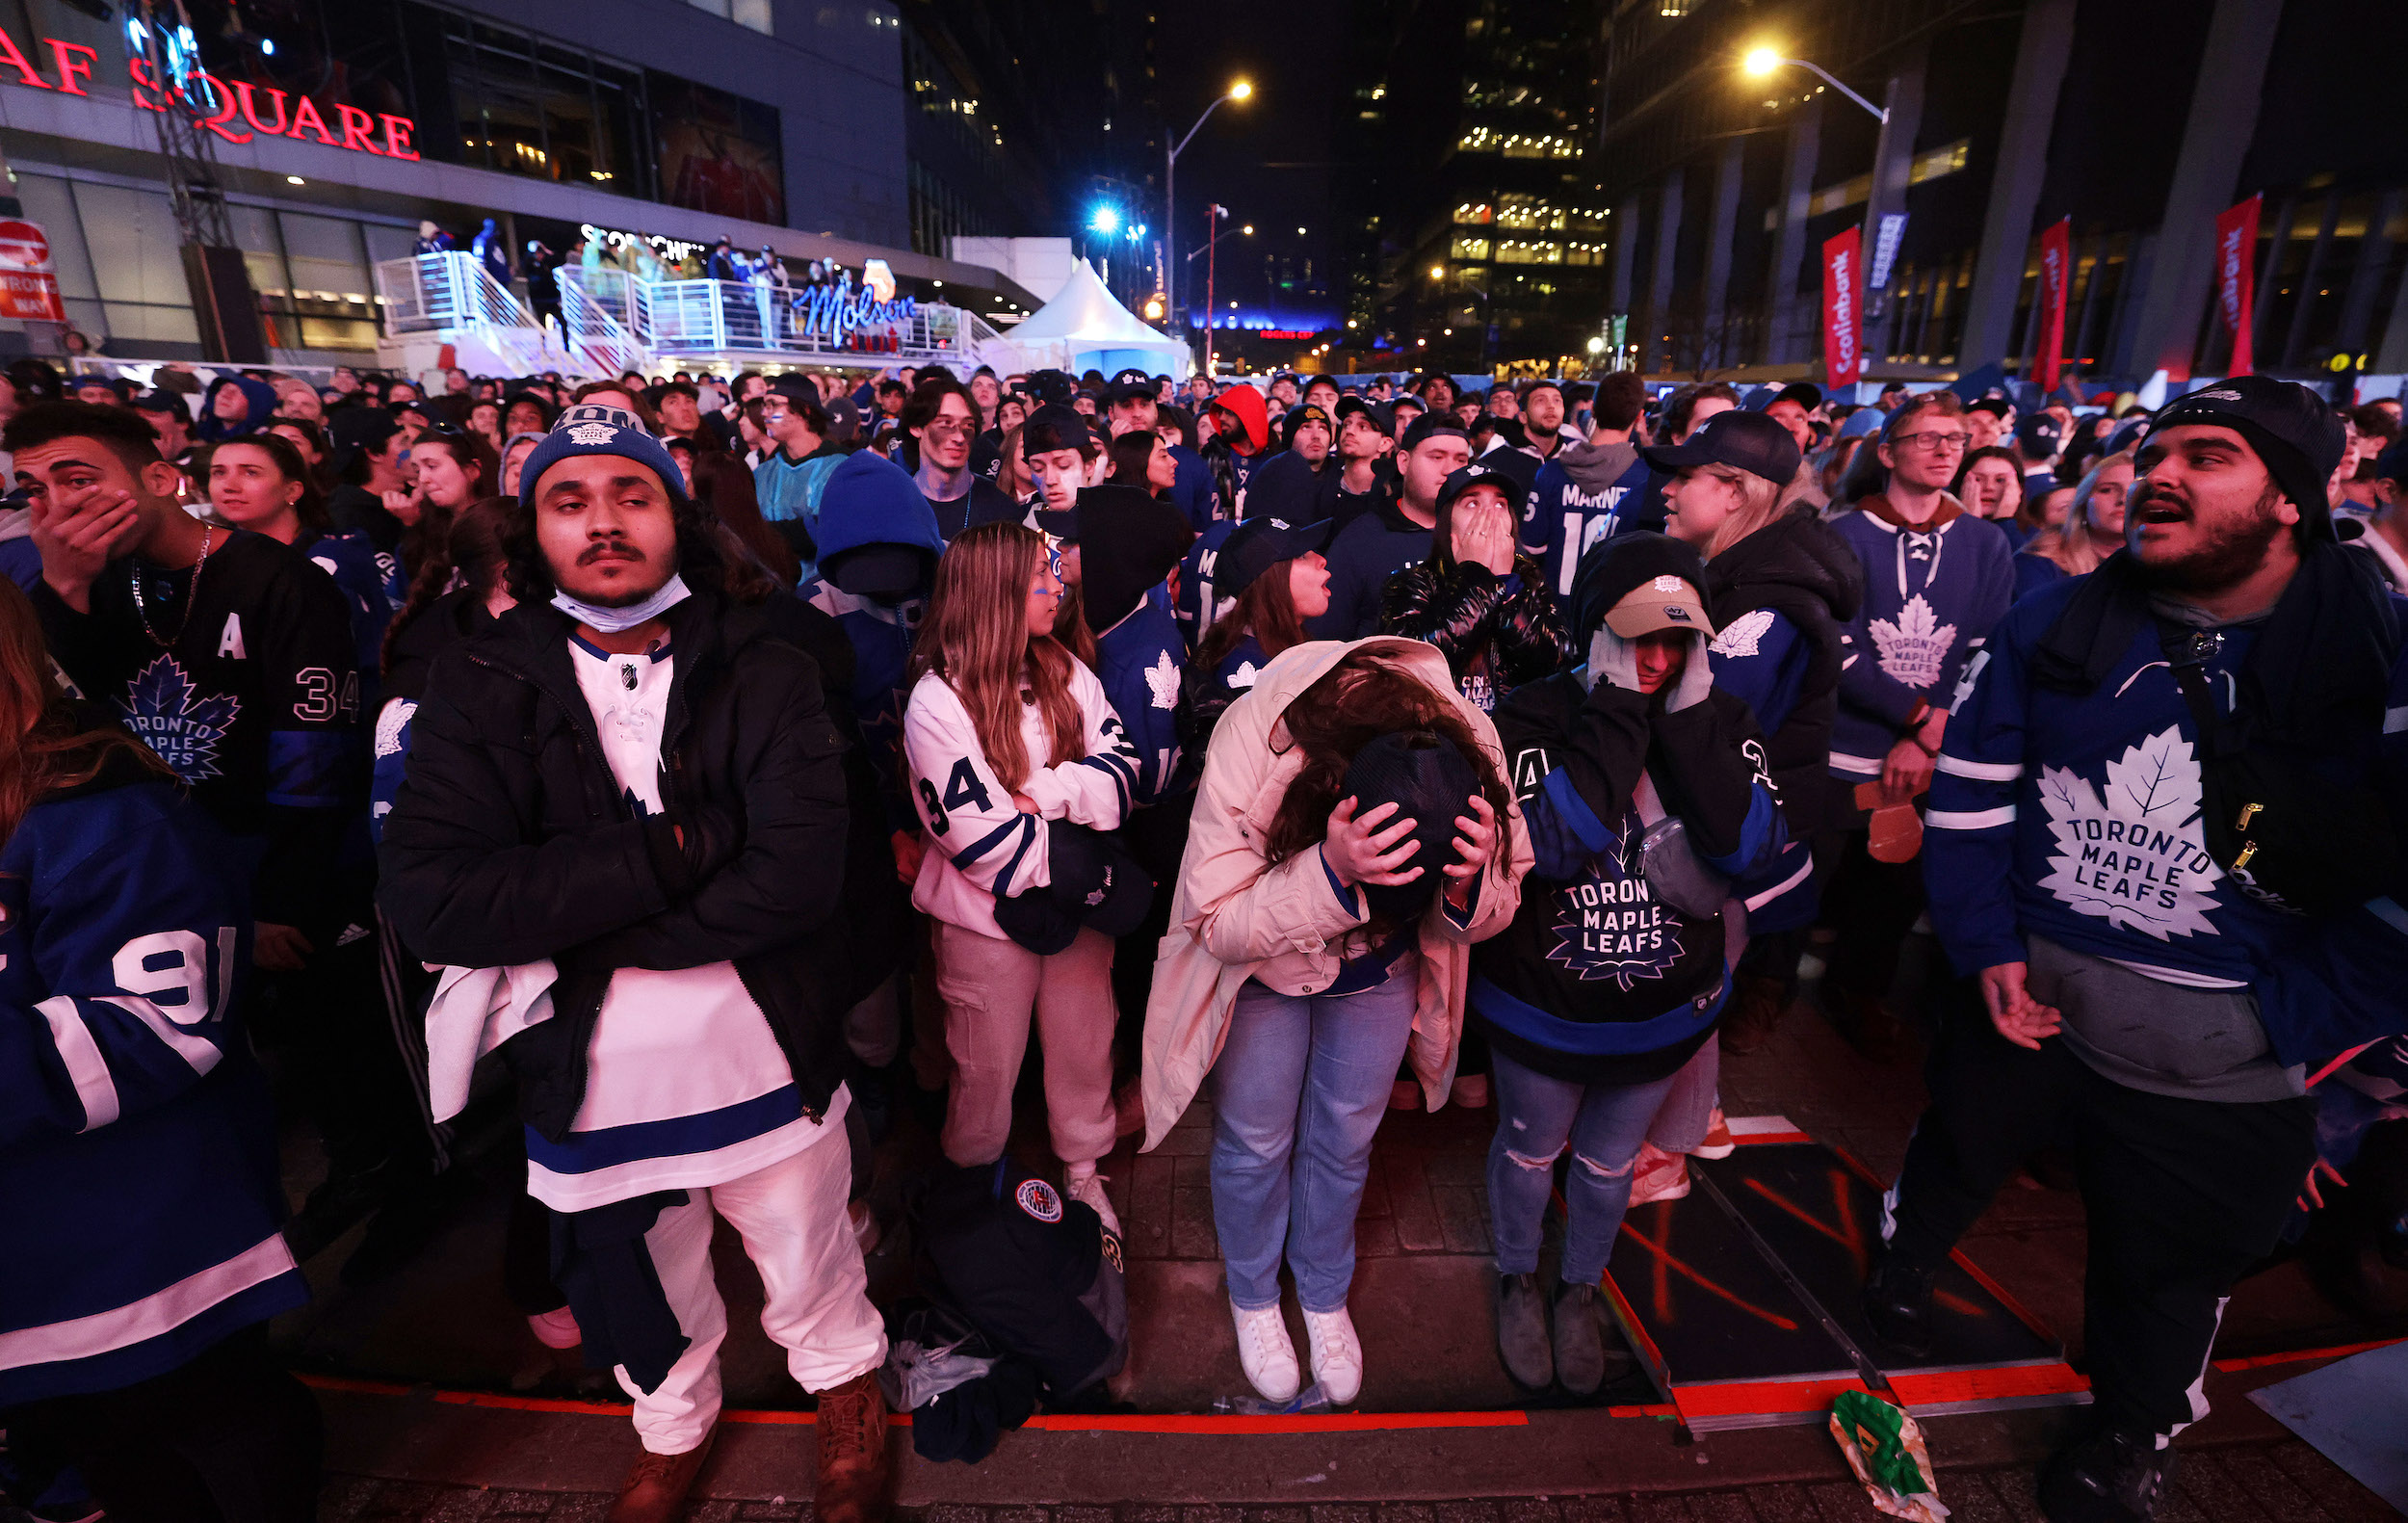 TORONTO, ON- MAY 7 - Toronto Maple Leafs fans leave after the Leafs fall 3-2 in Florida for game three in the second round of the NHL Stanley Cup playoffs, Toronto fans gathered at Maple Leaf Square outside Scotiabank Arena in Toronto. May 7, 2023. (Steve Russell/Toronto Star via Getty Images)